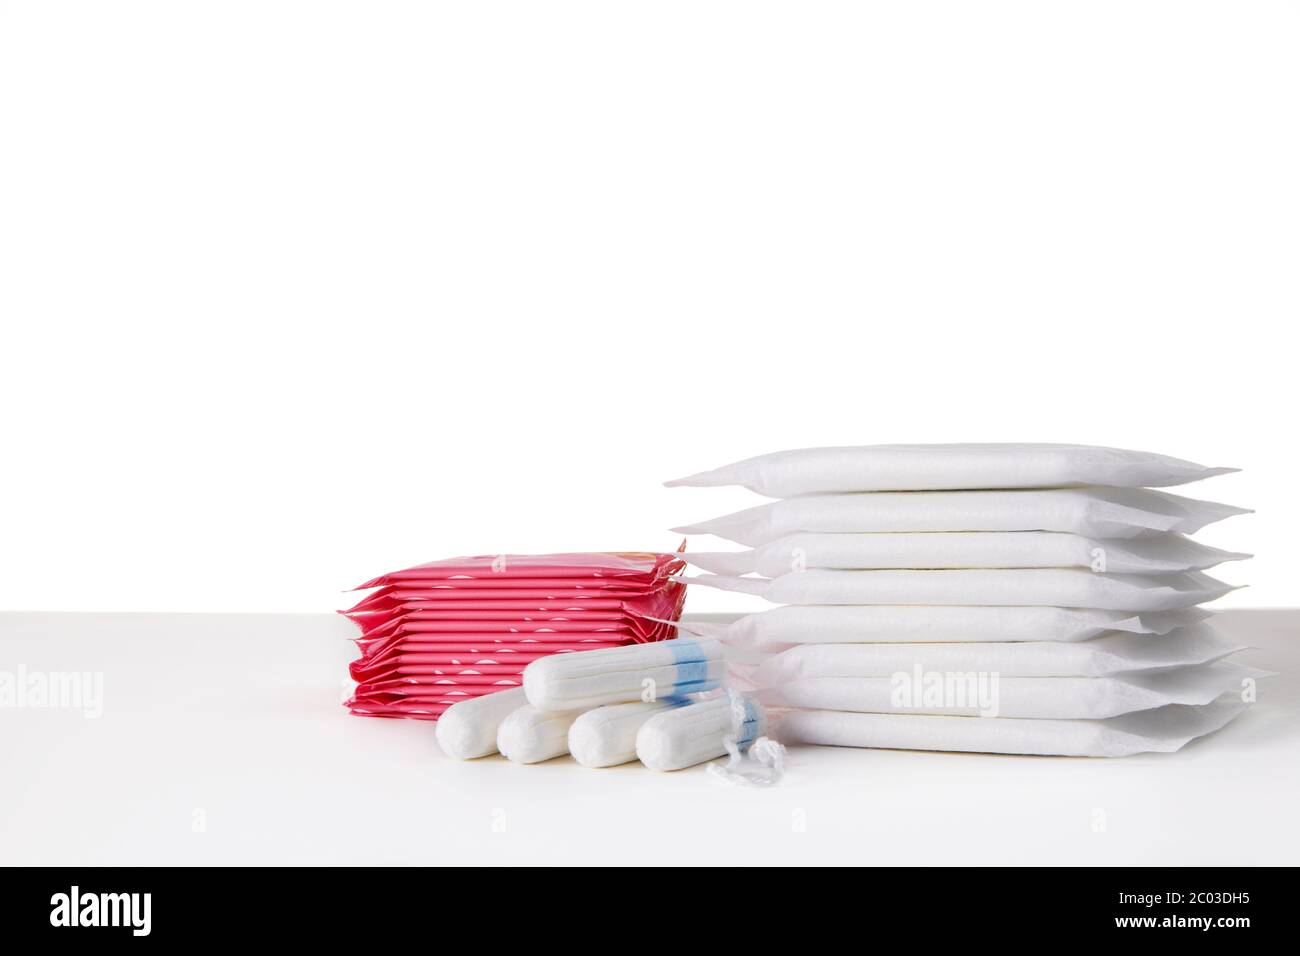 many menstrual sanitary pads and cotton tampons on white background. Feminine hygiene products Stock Photo